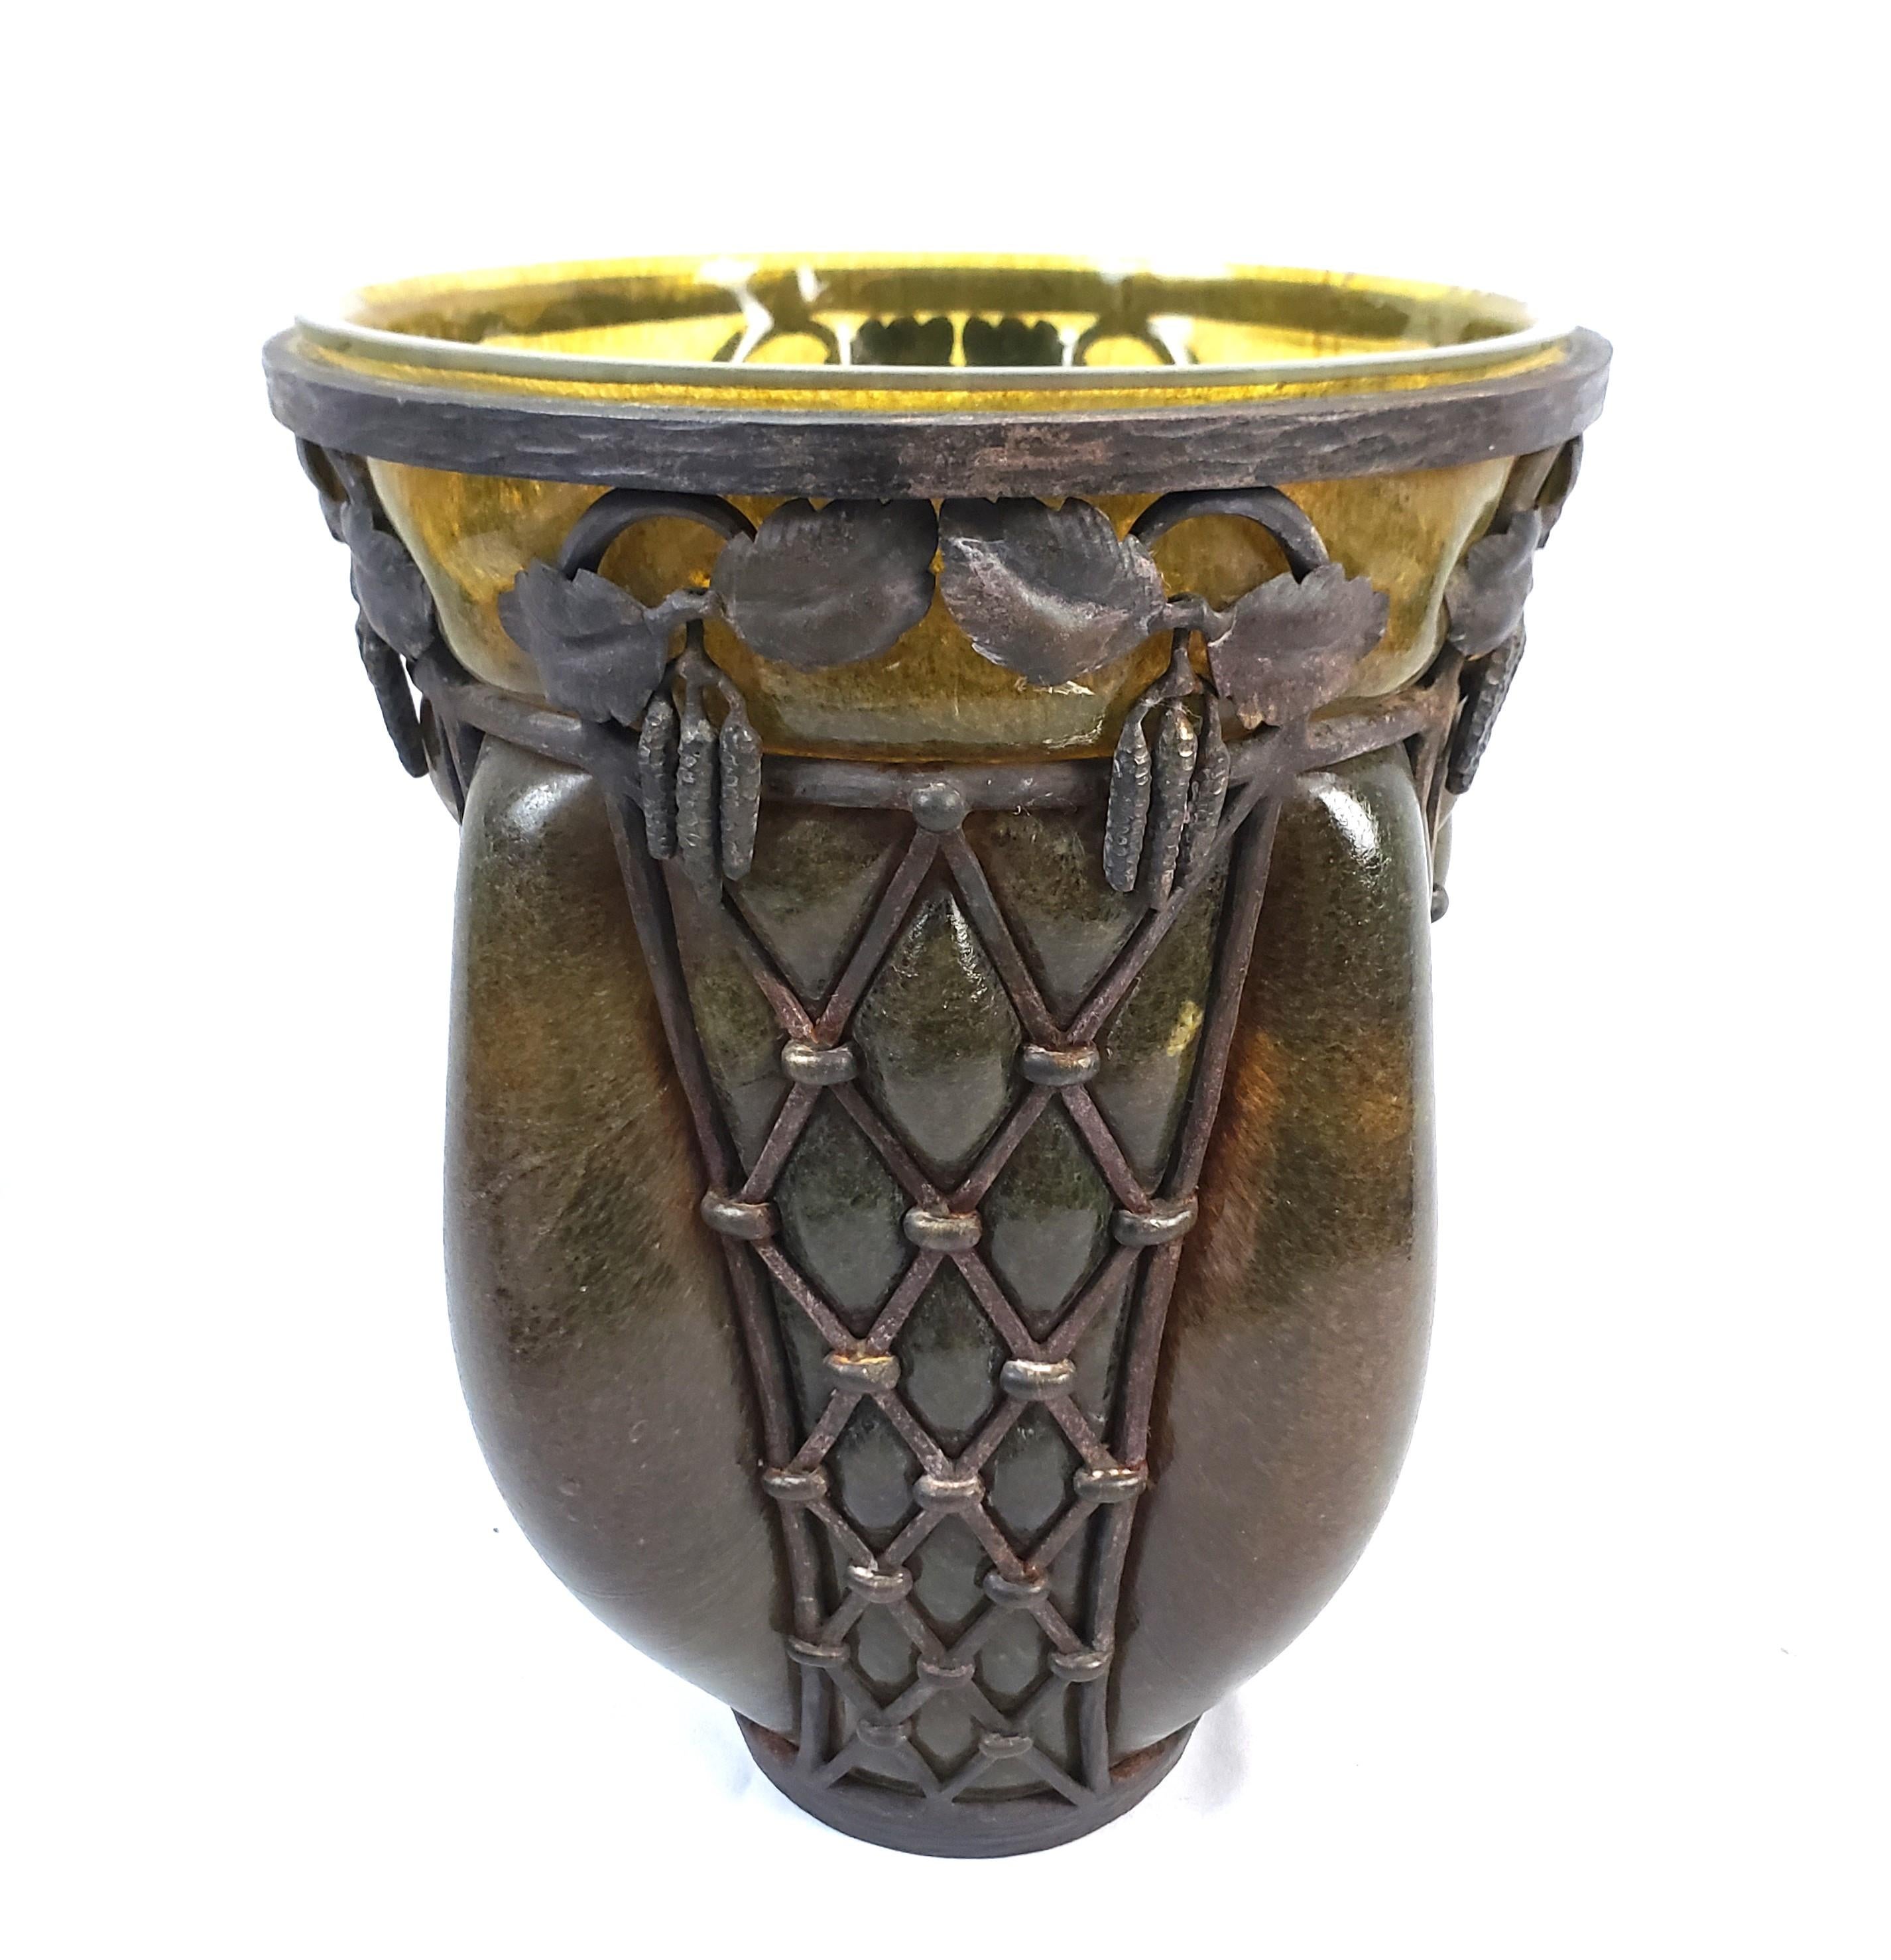 This large art glass vase was done by the renowned artists Louis Marjorelle and Daum Nancy of France and dates to approximately 1920 and done in the signature Art Deco style. The vase is done with a very thick dark amber art glass blown and formed